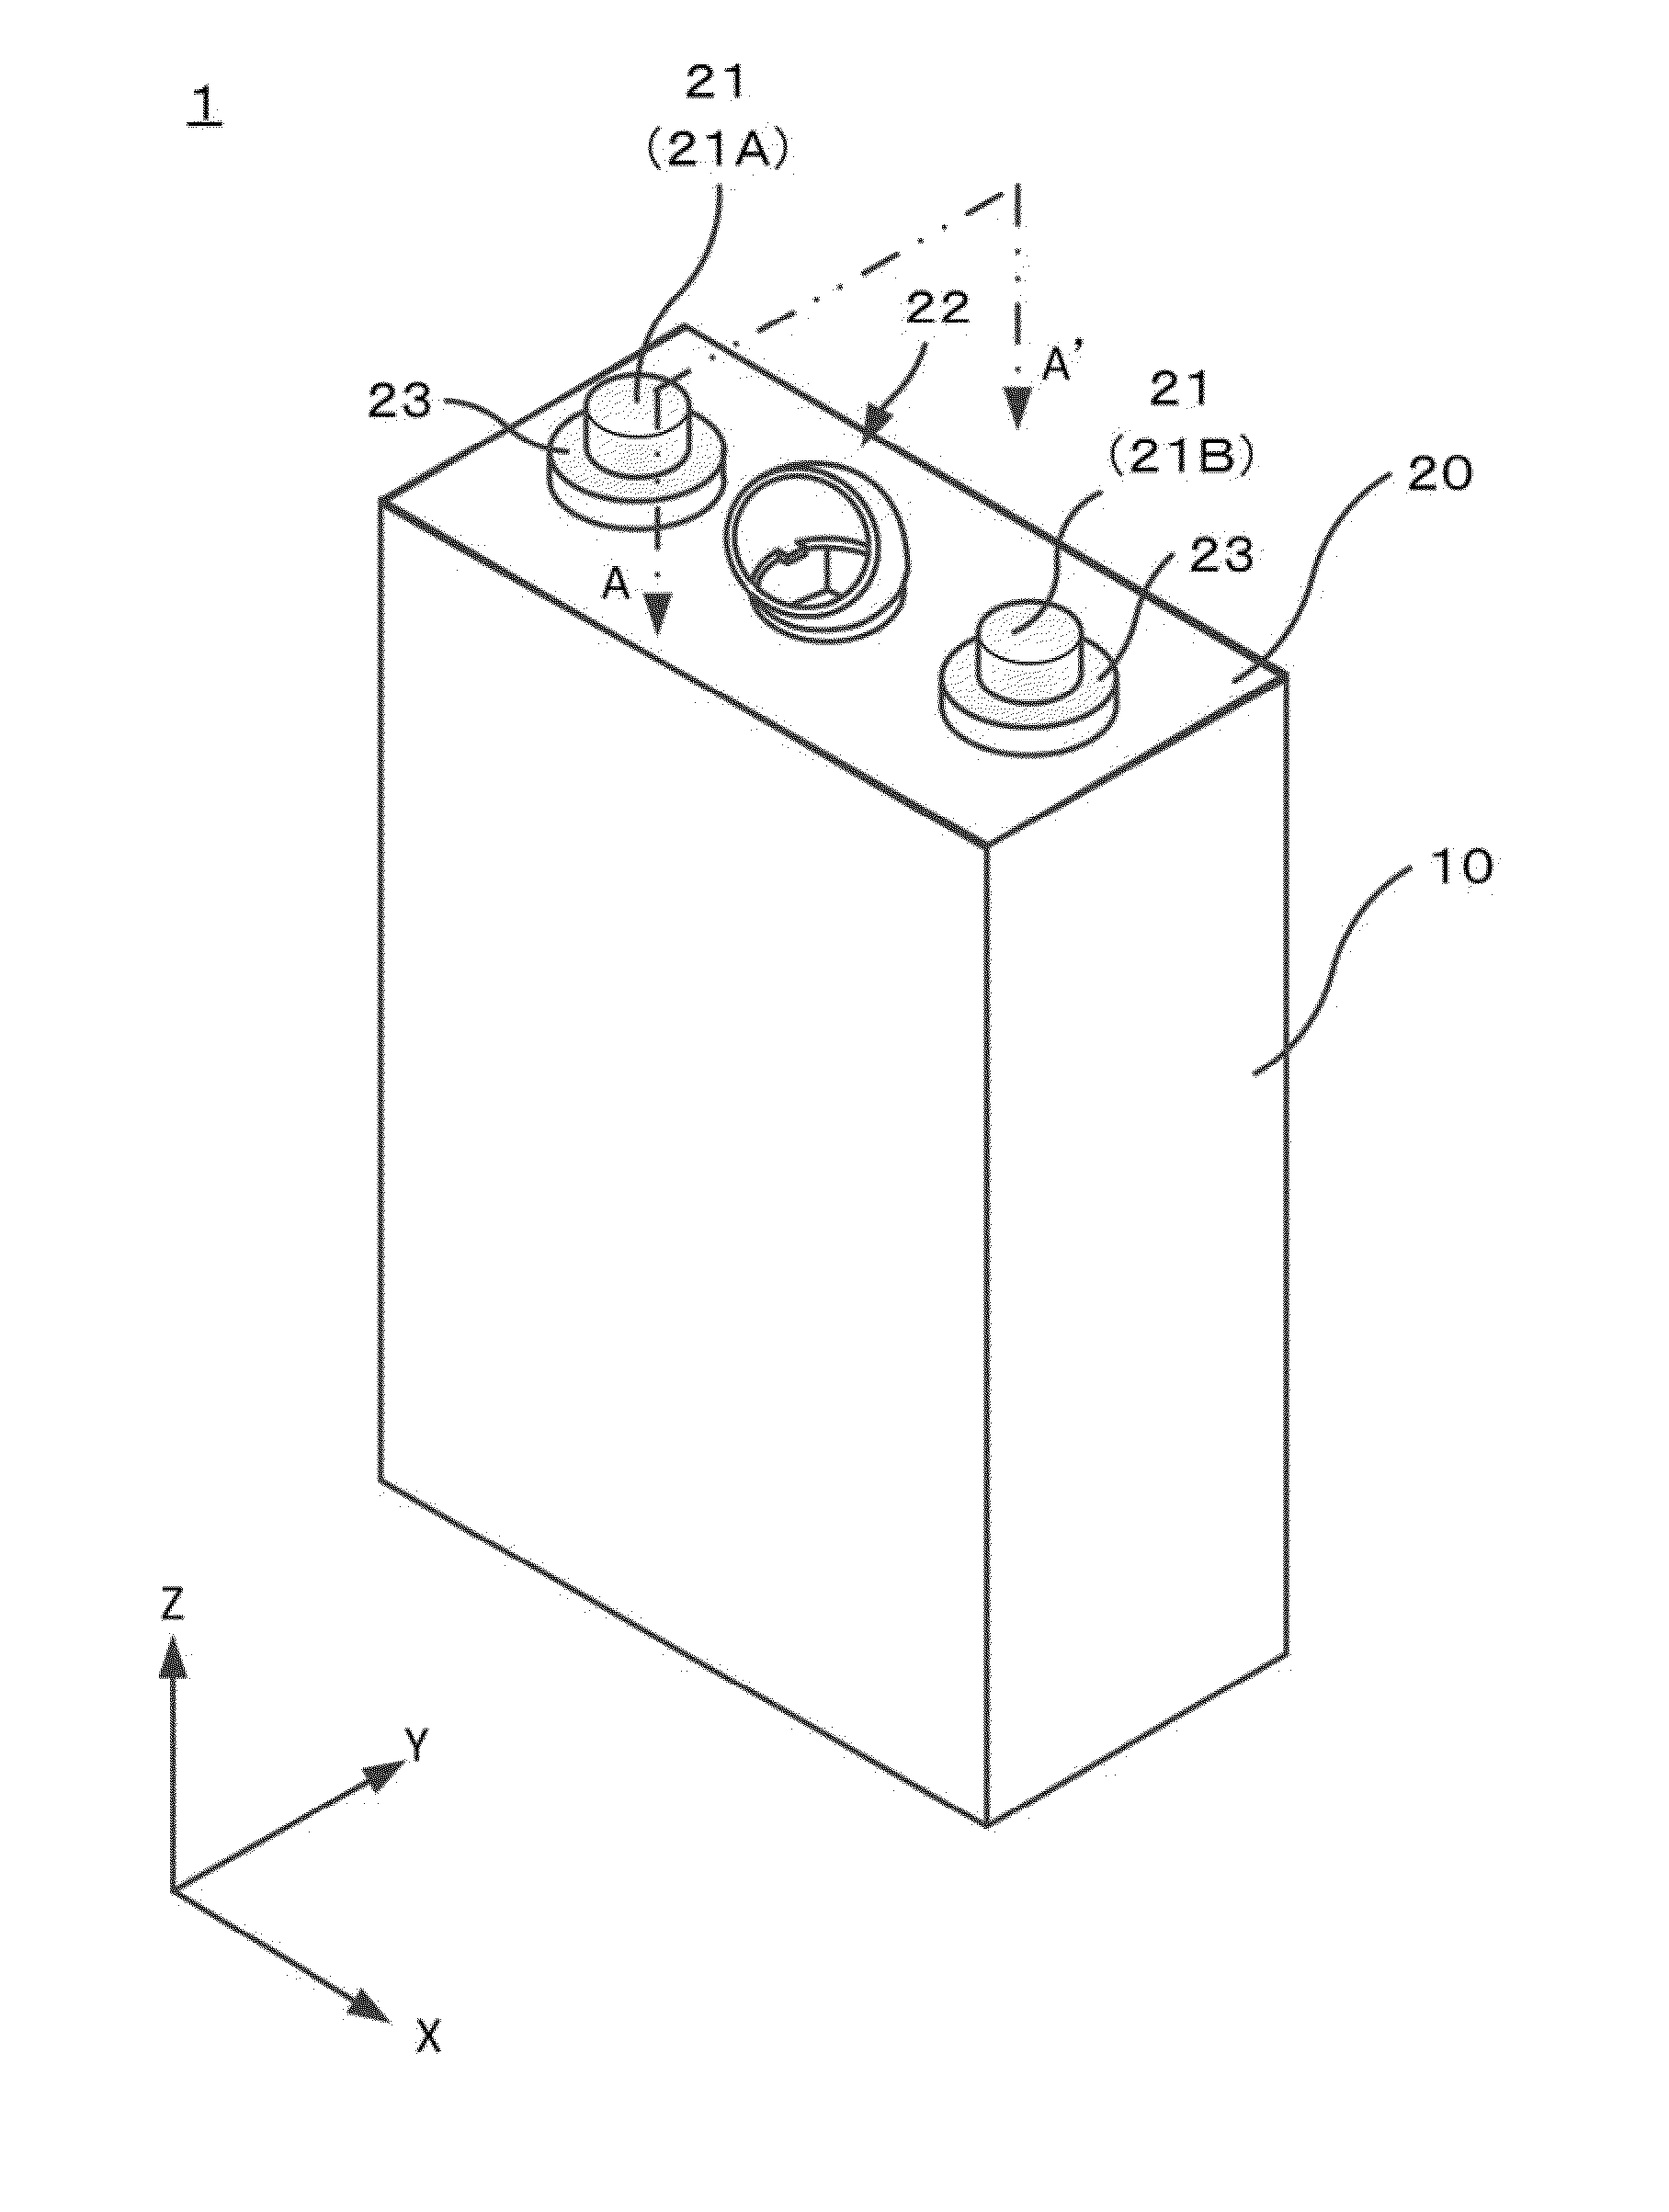 Battery and battery system